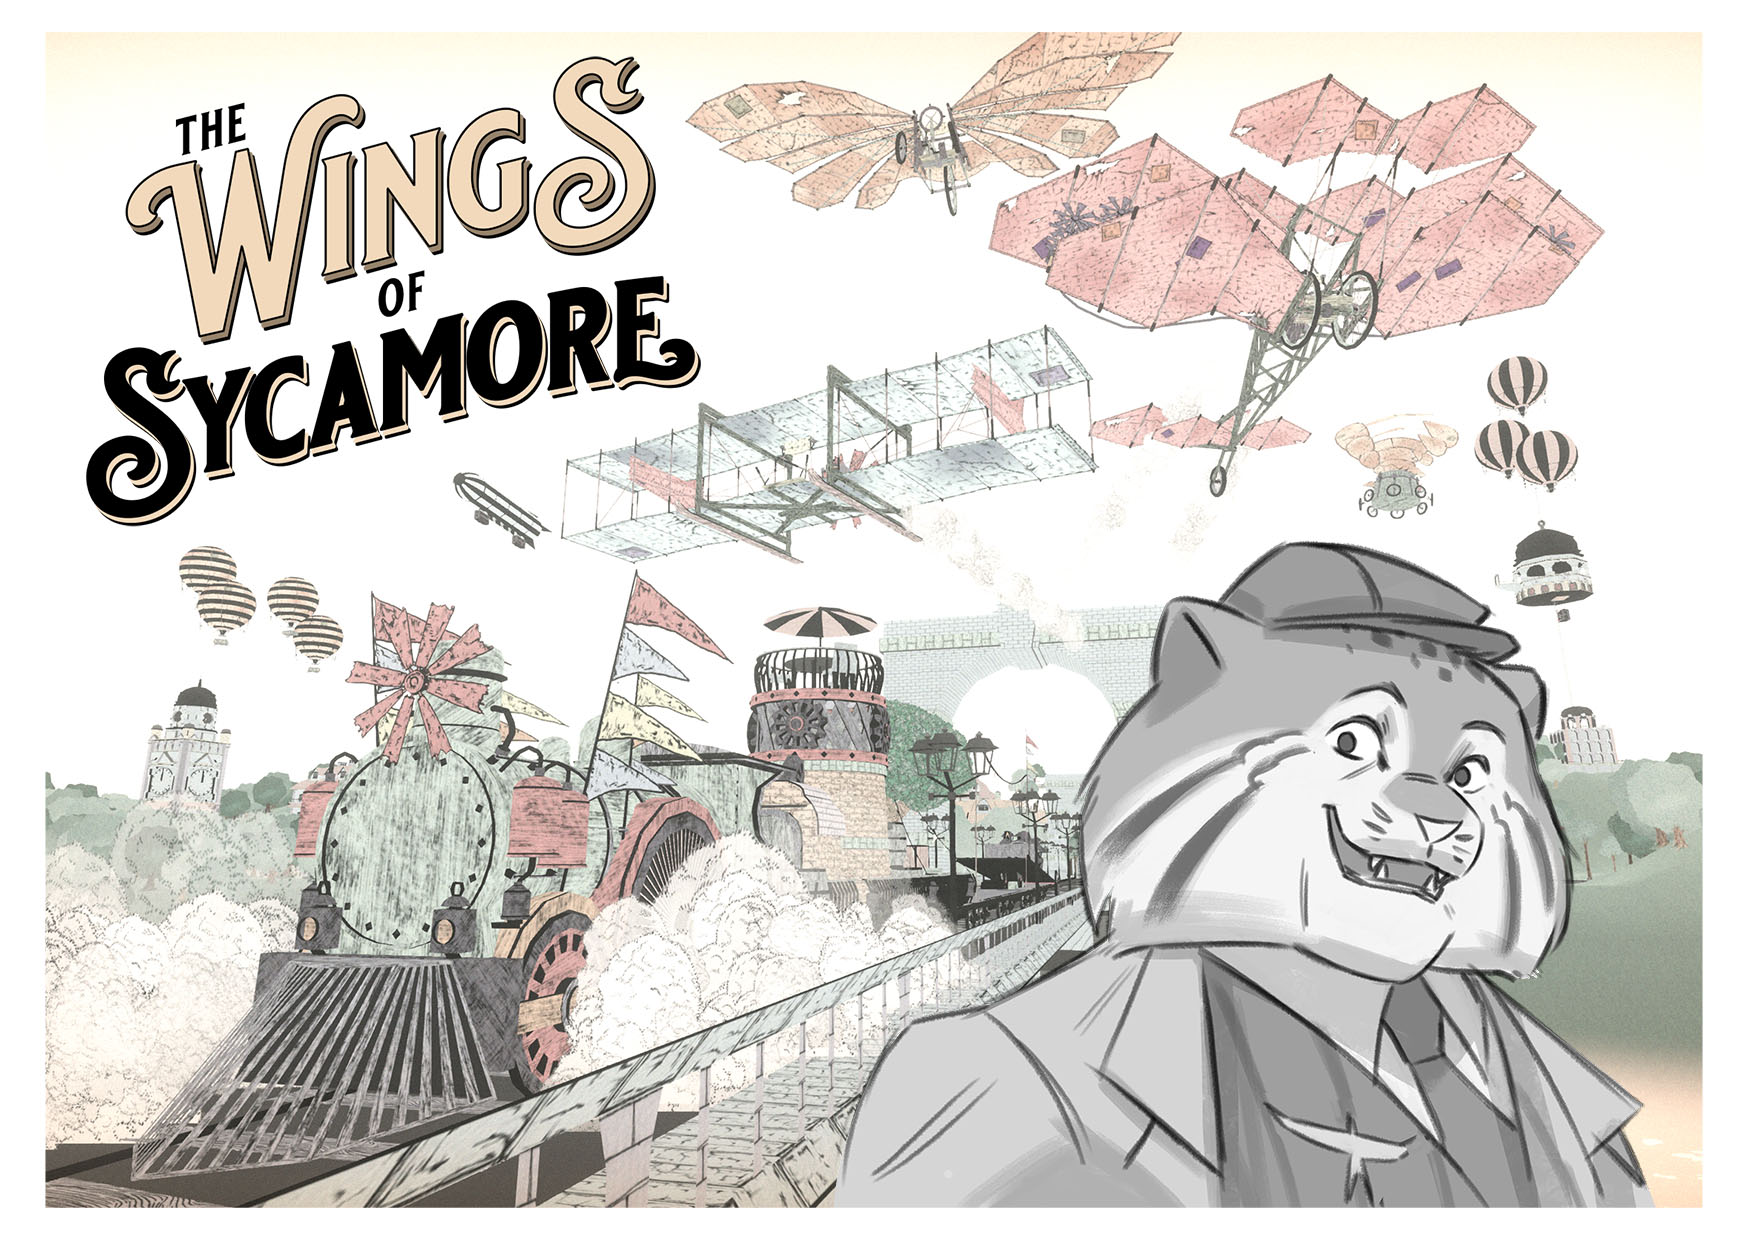 Wings of Sycamore logo. Also pictured - 3 aircraft in flight, a steam train, and an illustration of Captain Maurice Sycamore - the legendary aviator who is also a cat.